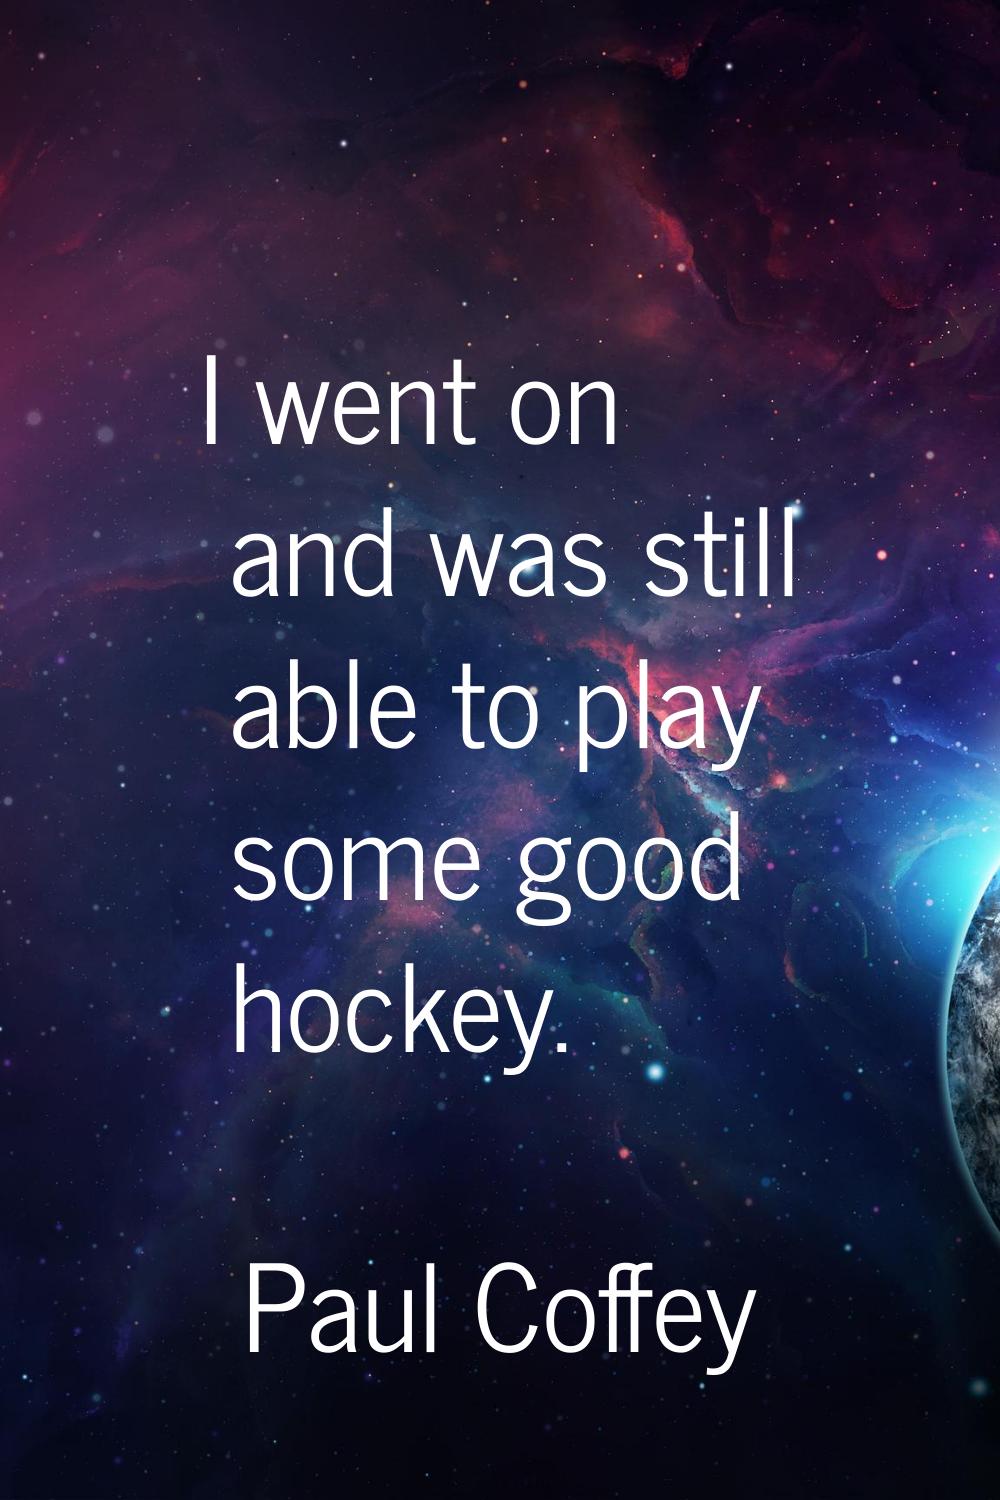 I went on and was still able to play some good hockey.